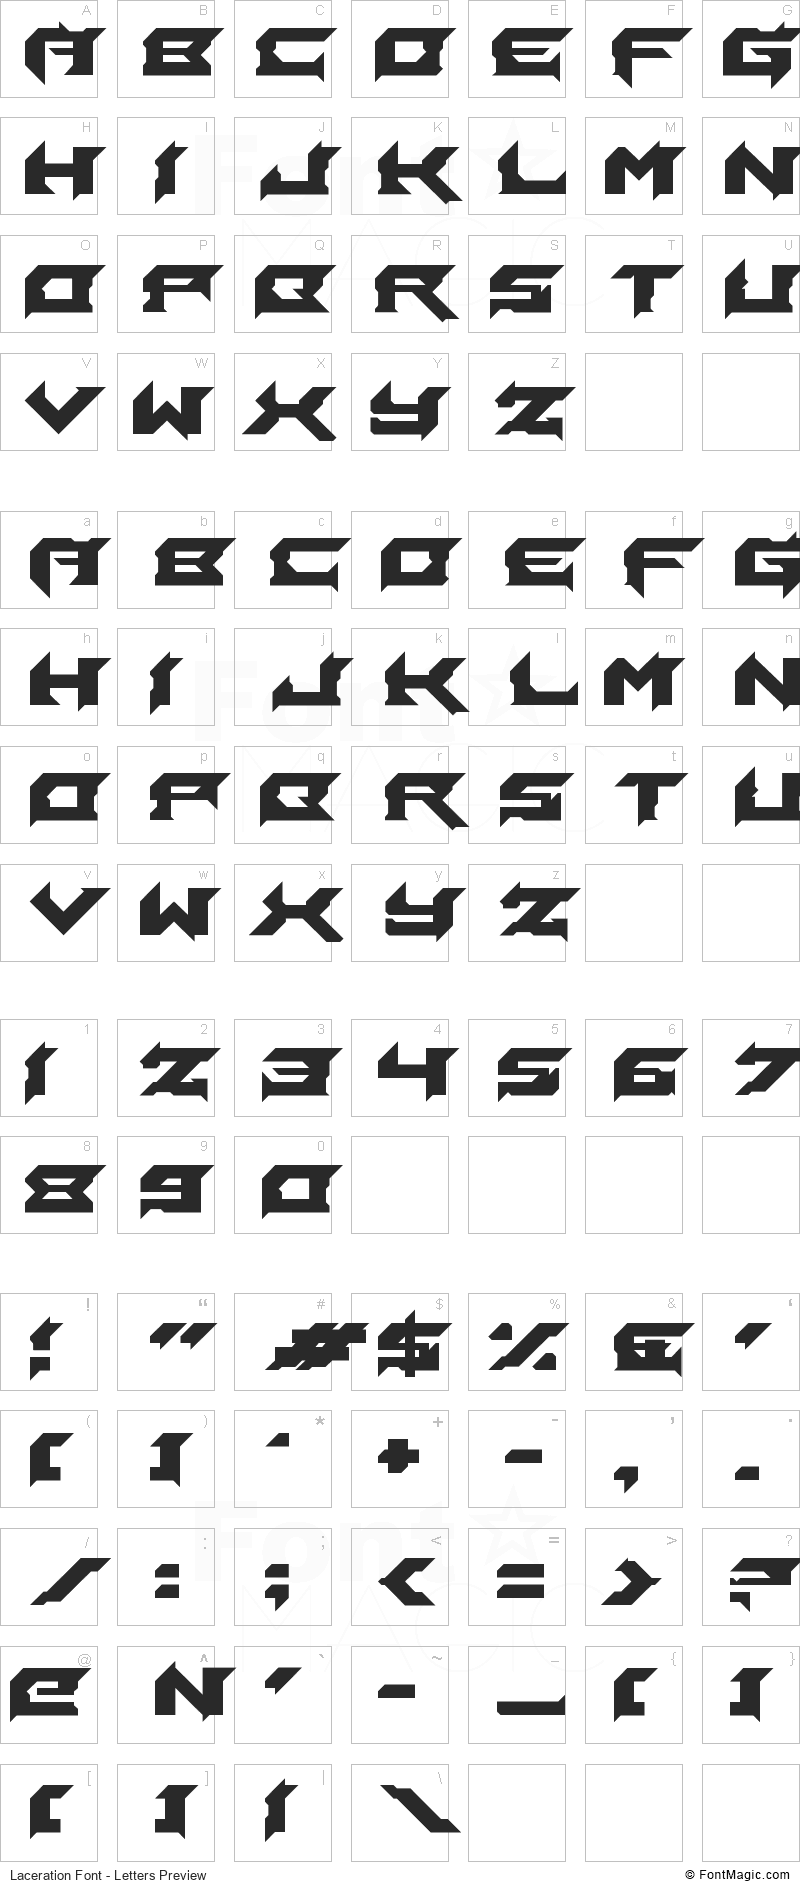 Laceration Font - All Latters Preview Chart